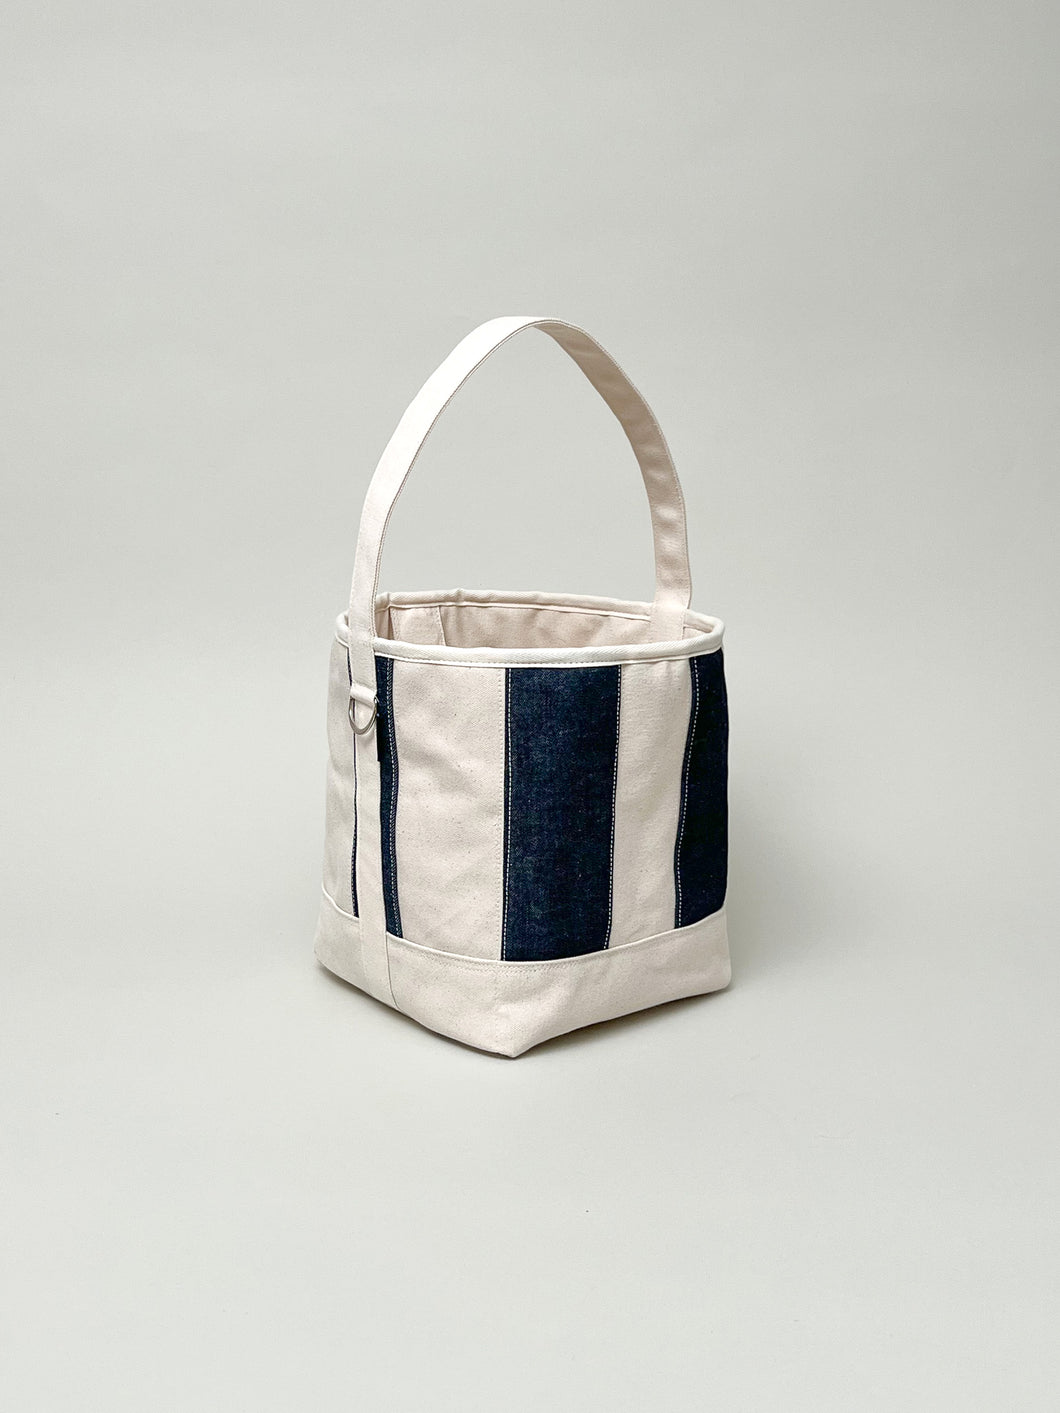 THE PATCHWORK BUCKET TOTE